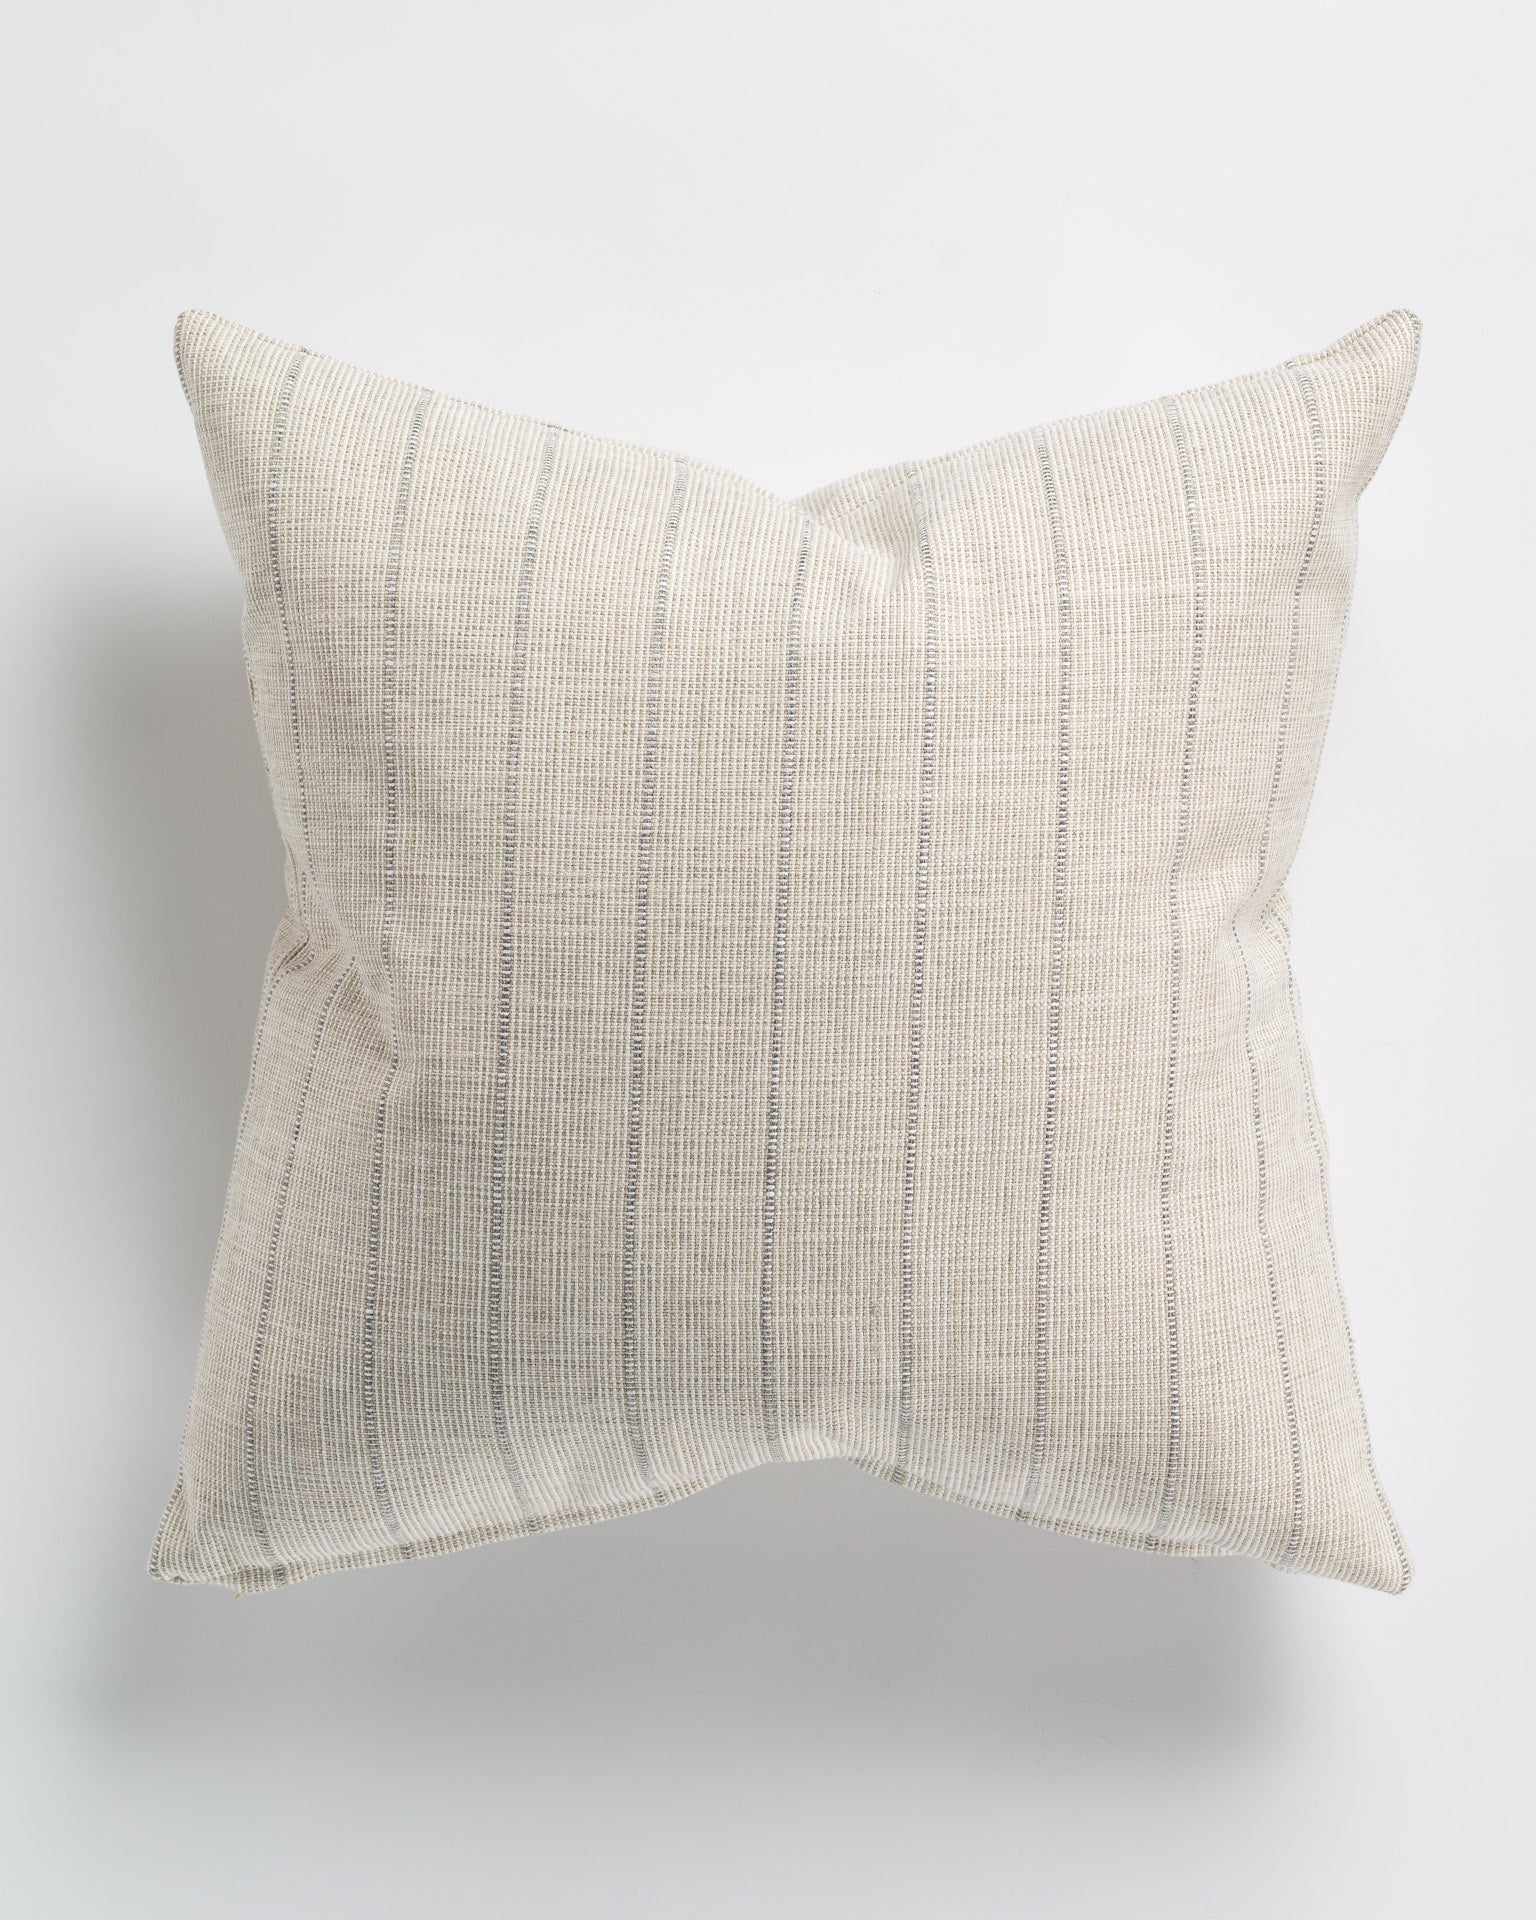 A square Reed Stripe Silver Pillow 26x26 from Gabby, with subtle vertical white stripes, set against a plain white background, epitomizes Arizona-style décor.